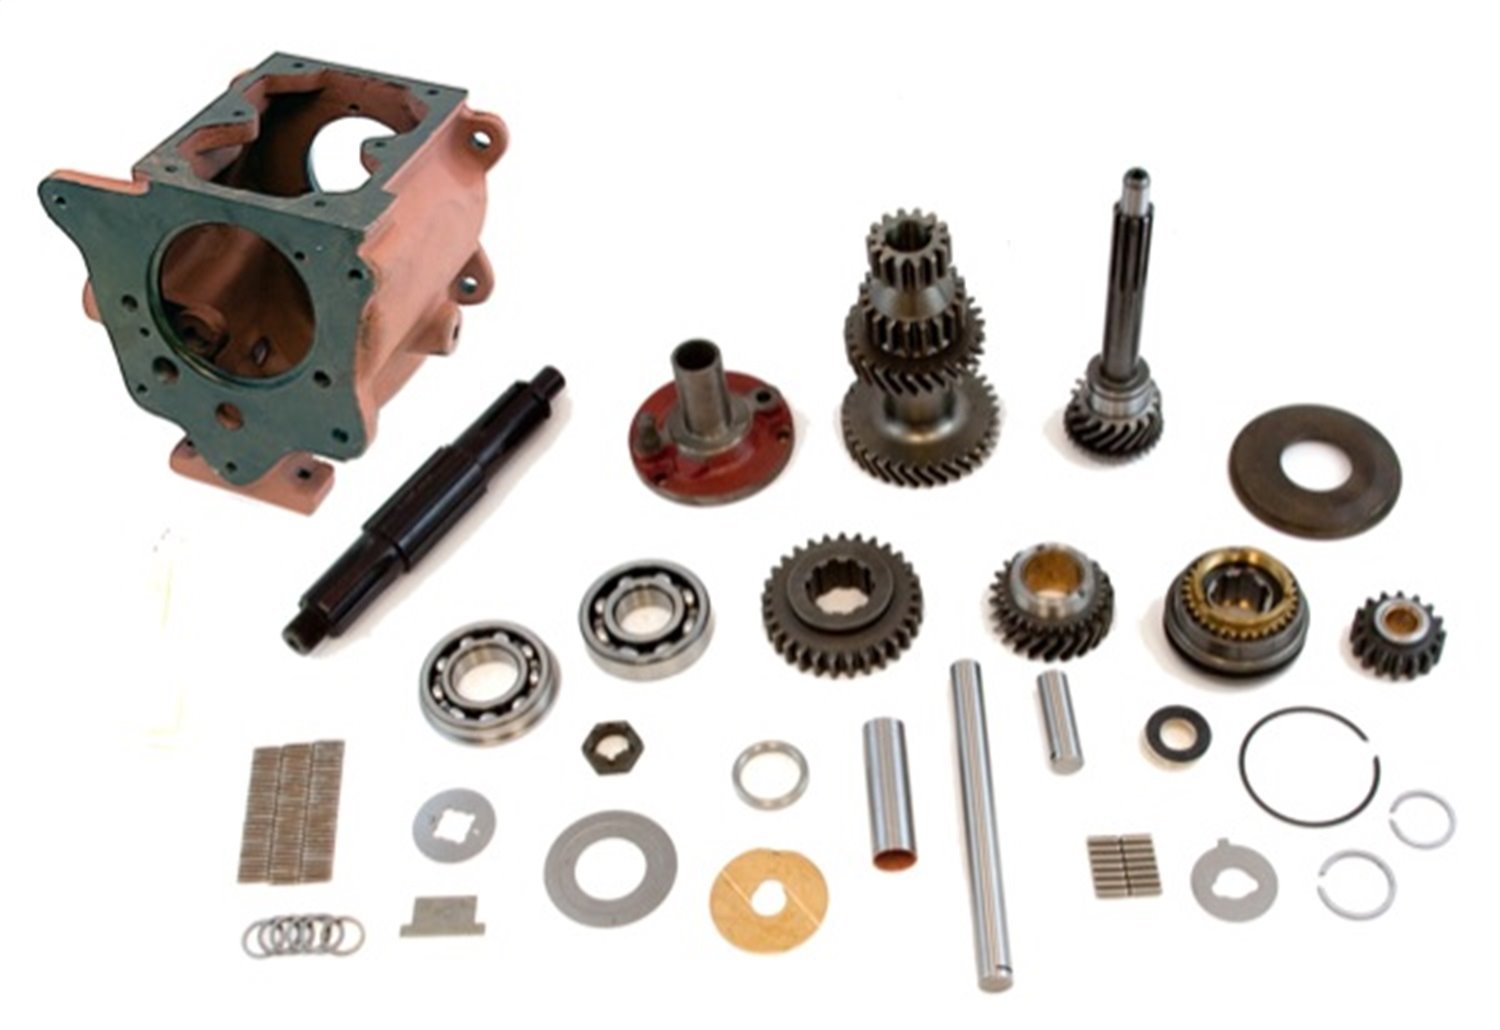 T90 Unassembled Transmission Kit 1941-1971 Willys/Jeep with Borg-Warner T90 3-Speed Manual Transmission